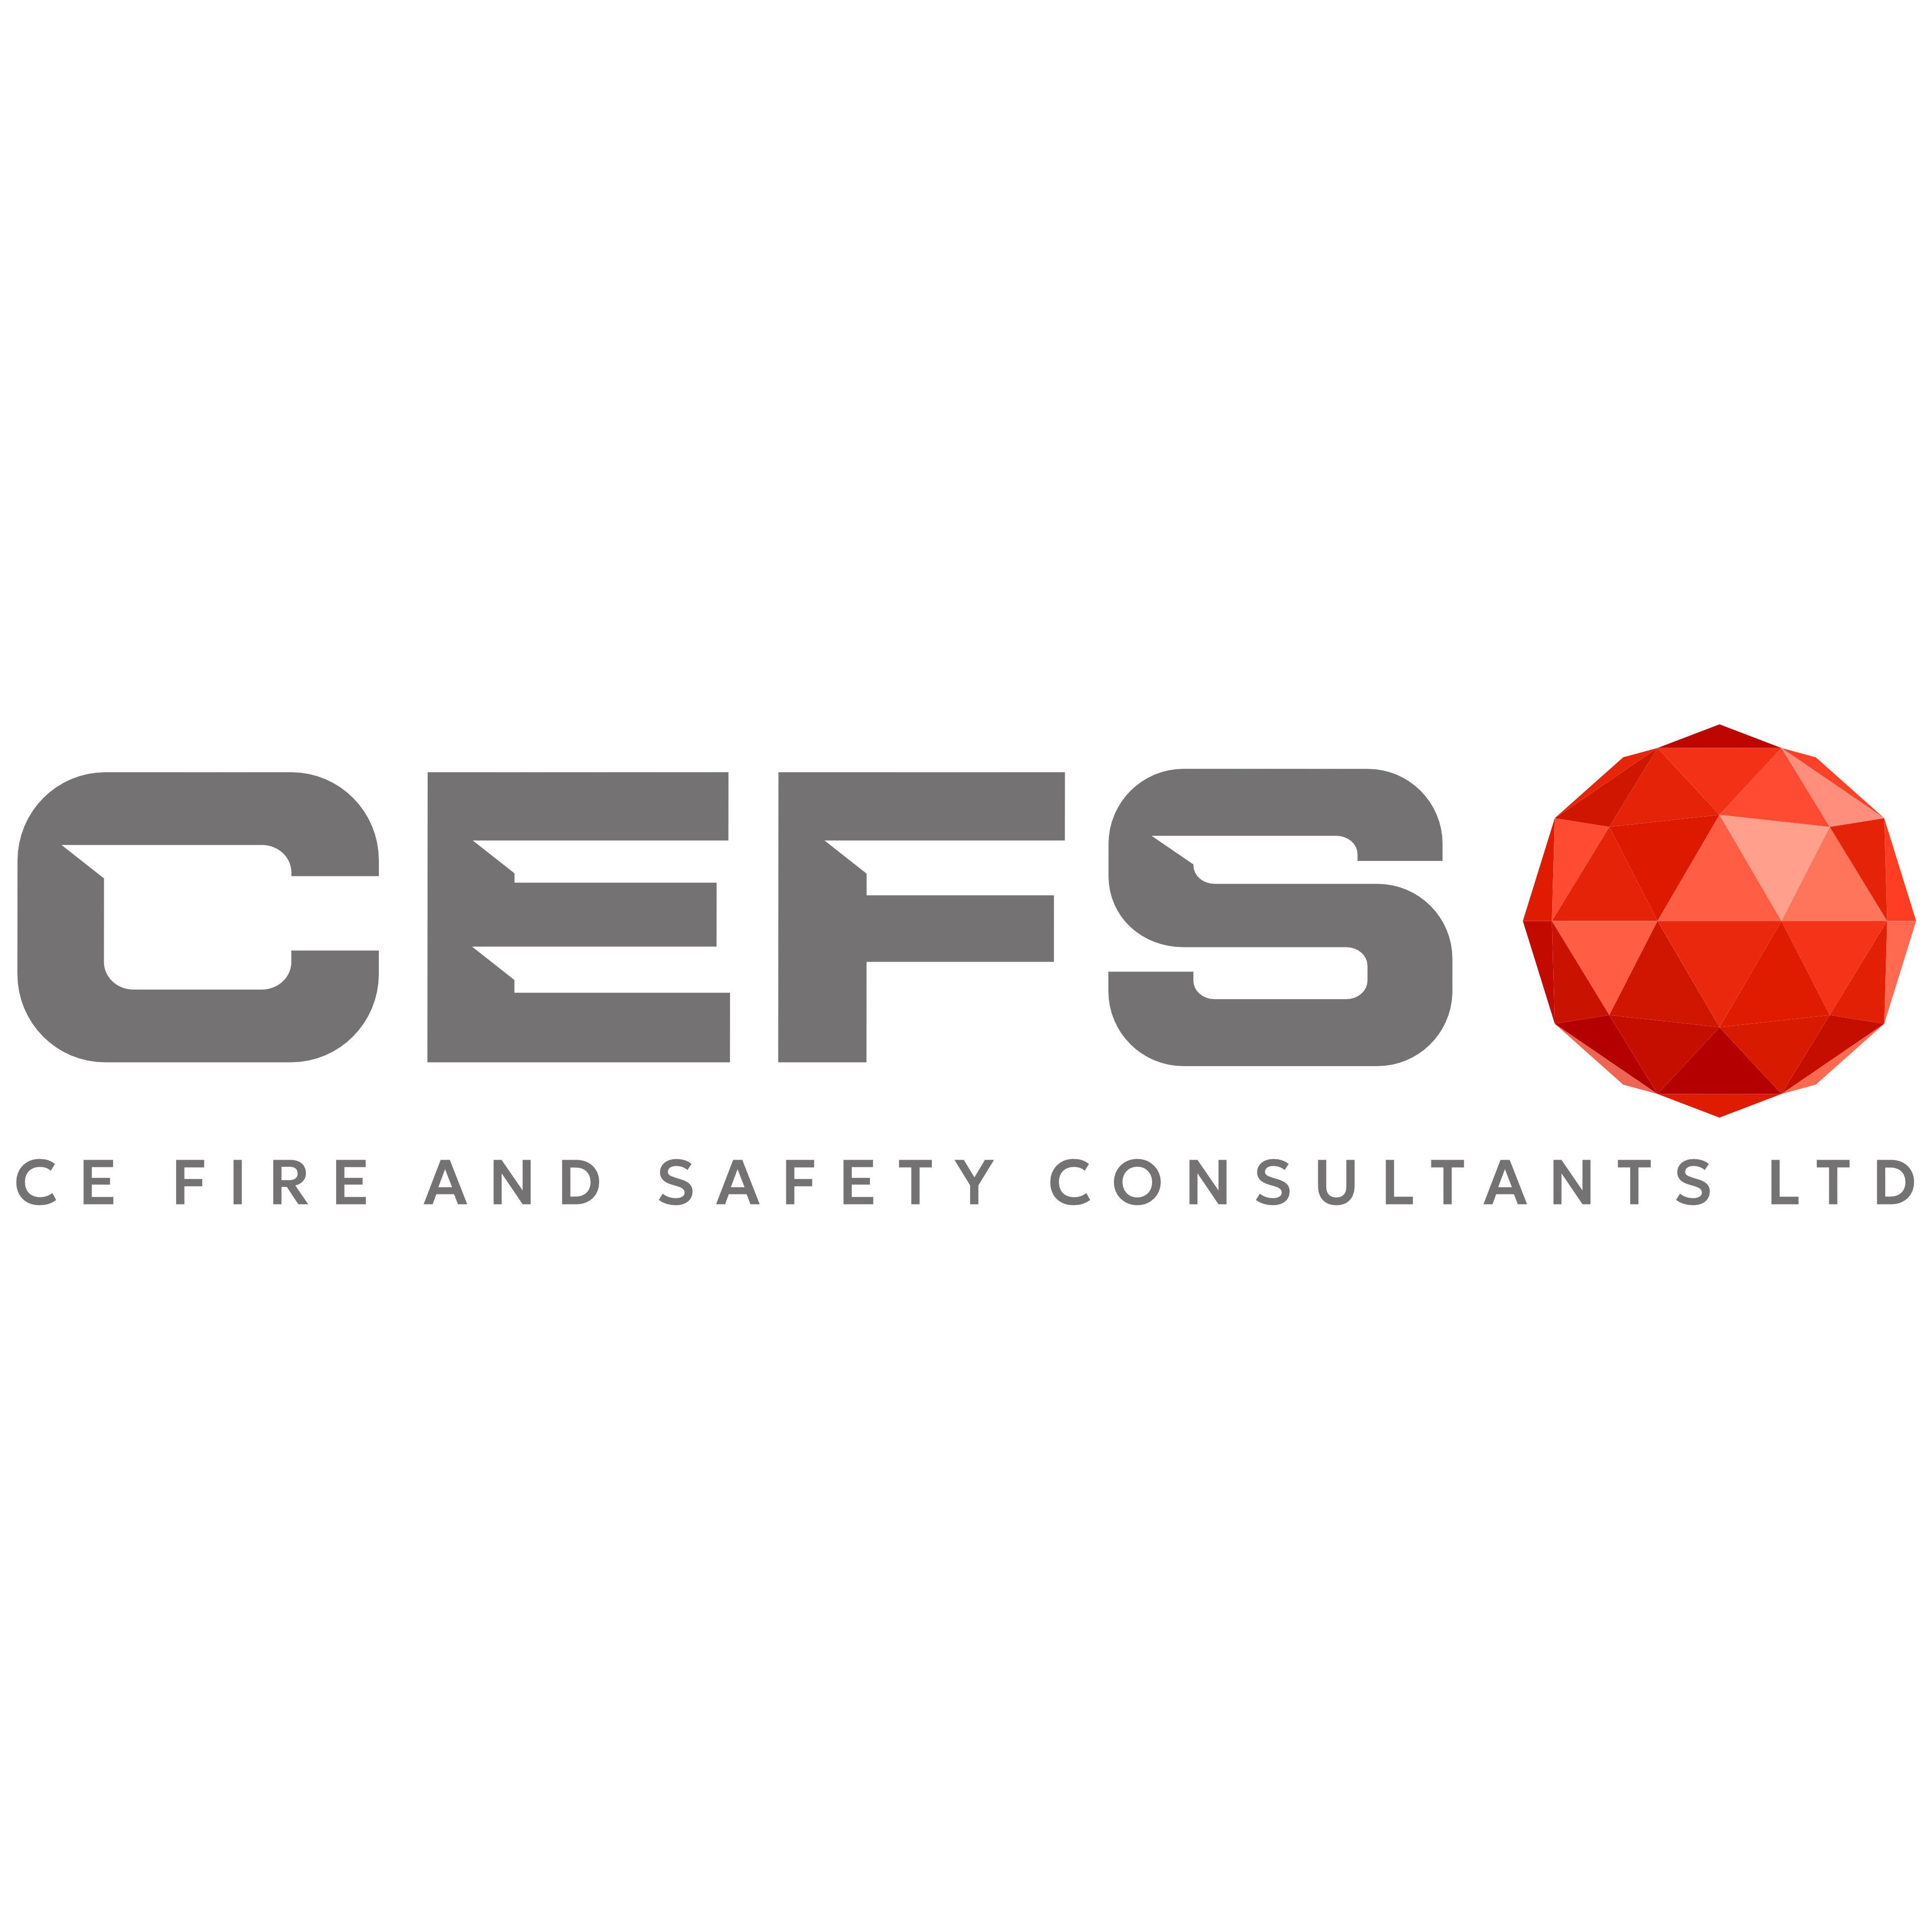 CE Fire And Safety Consultants Limited 1